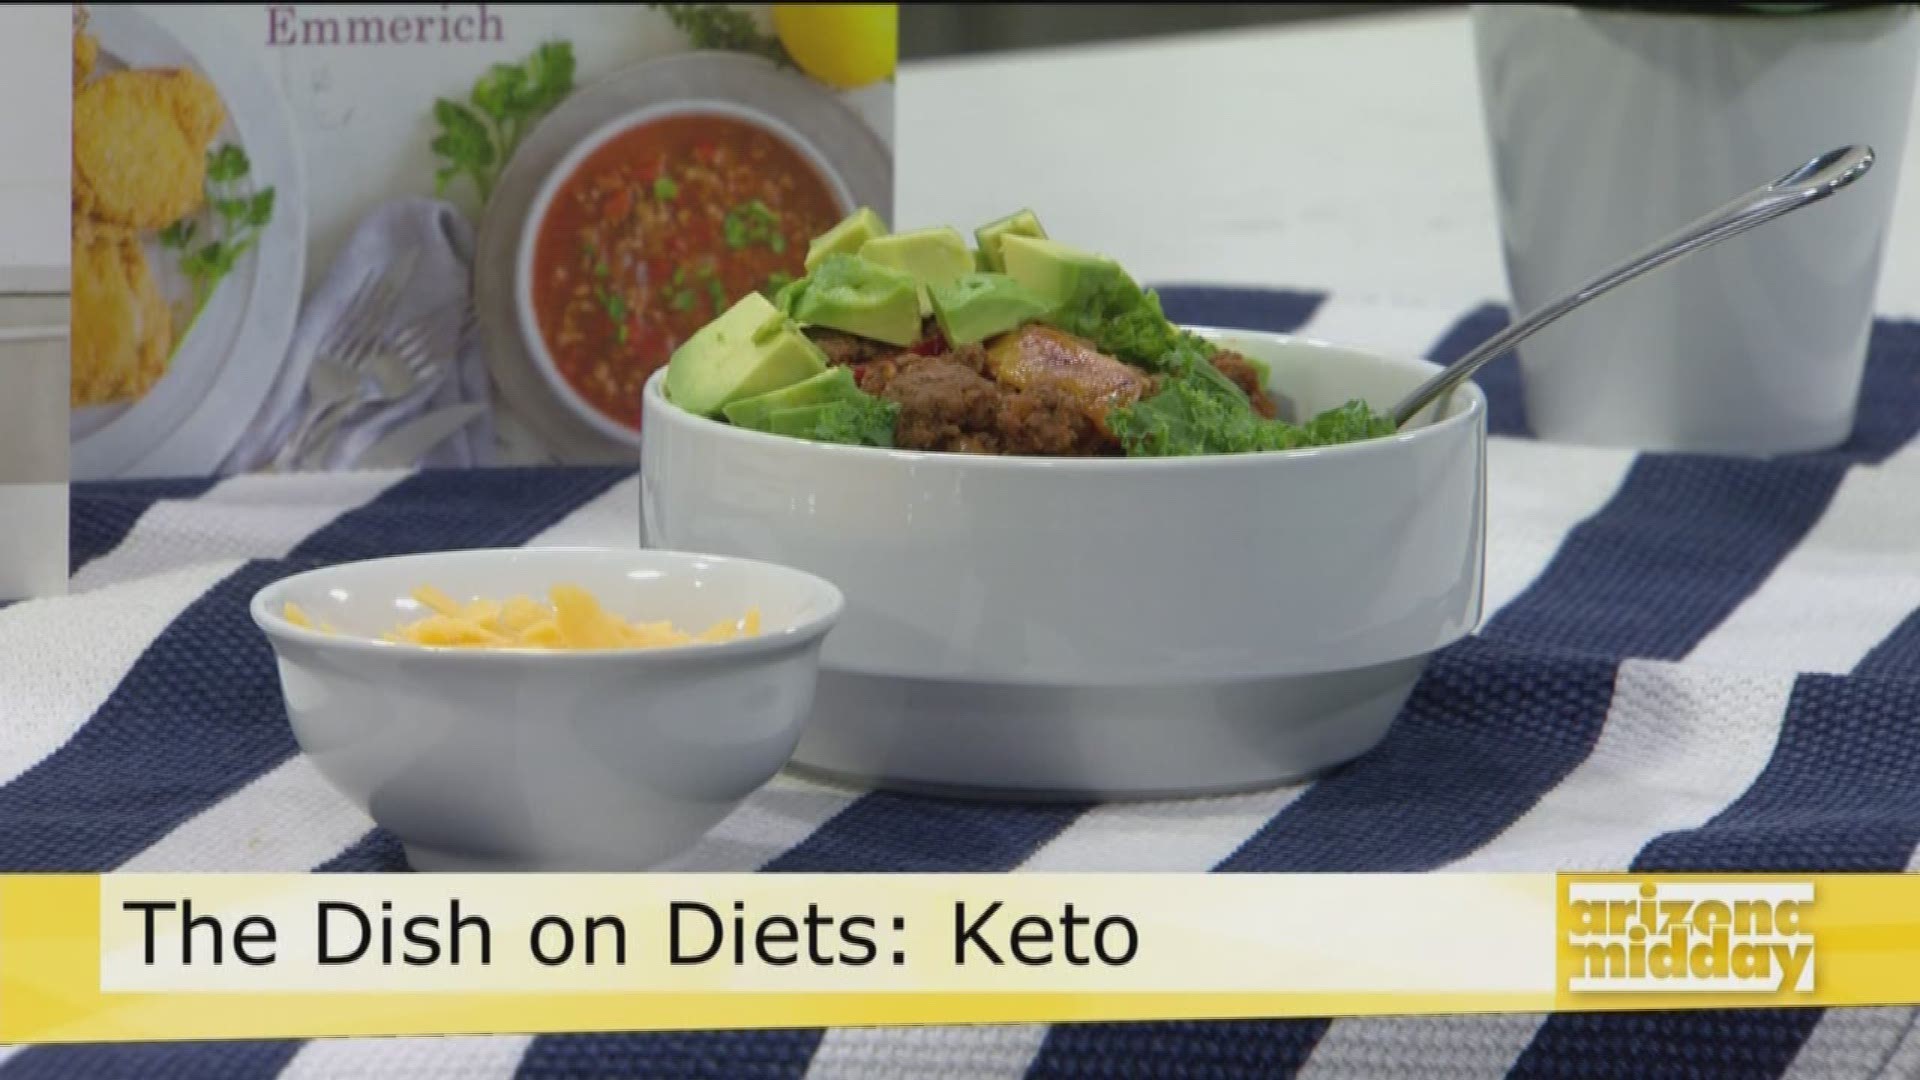 Nutrition and fitness coach Megan Rigby tells us about how to make your food keto-friendly.